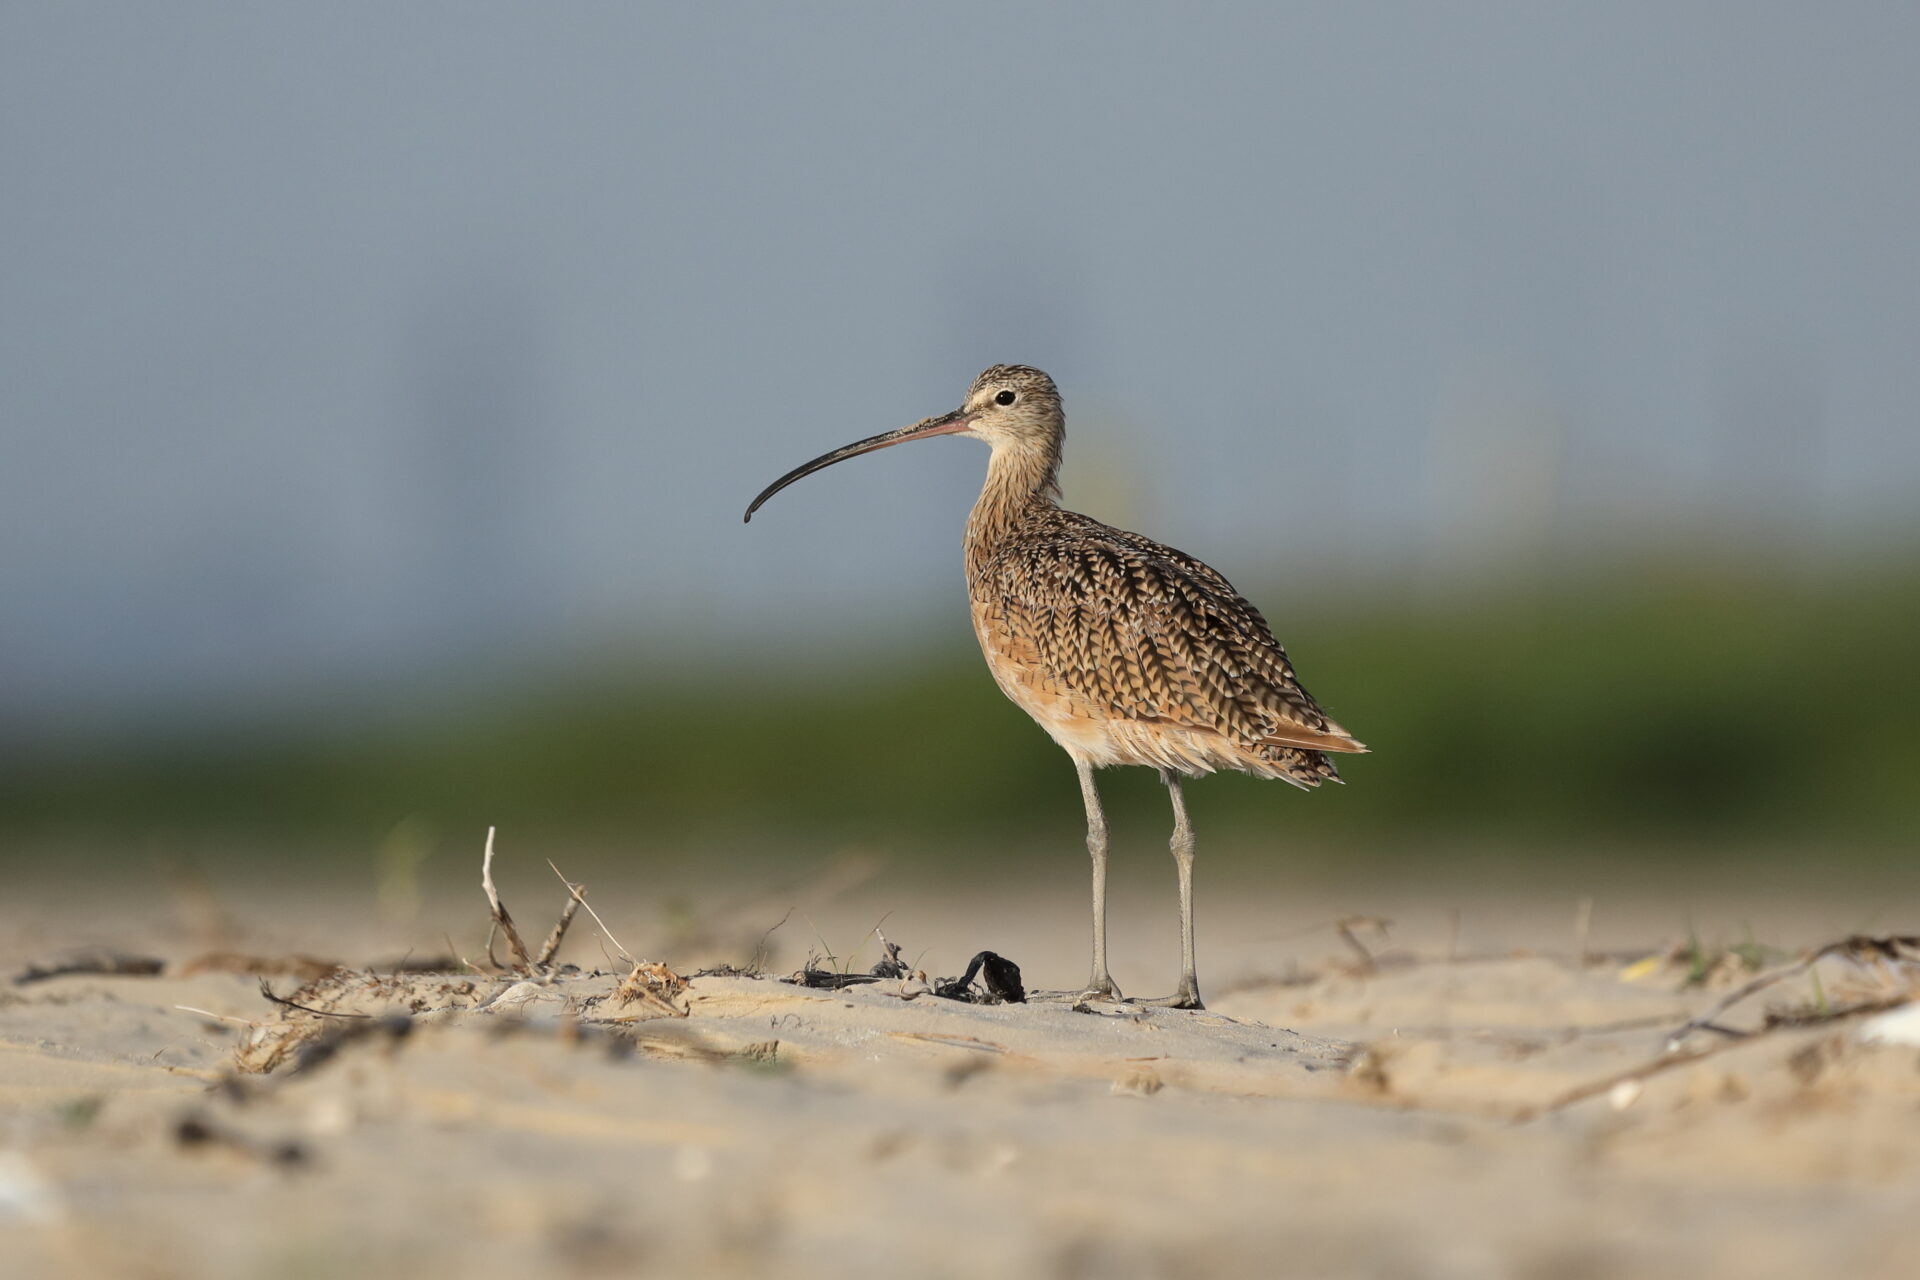 A photo of a Long-billed Curlew, against a blurred background.